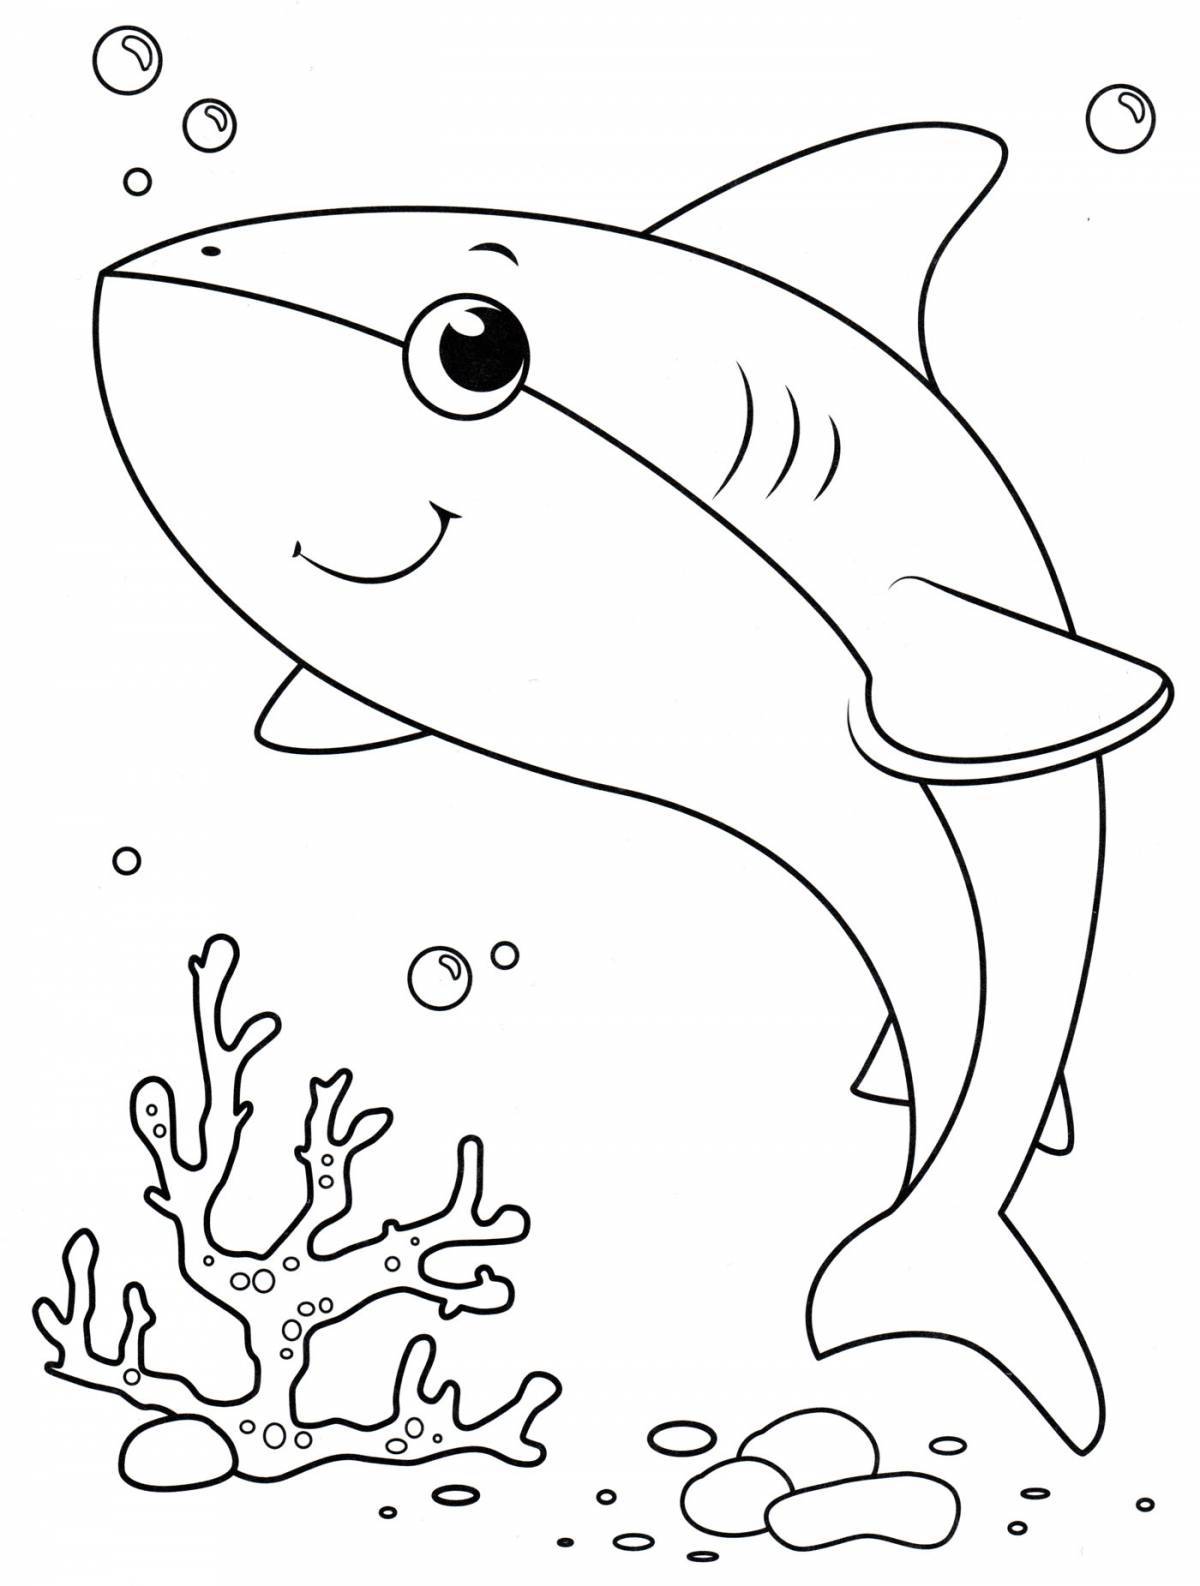 Gorgeous shark coloring book